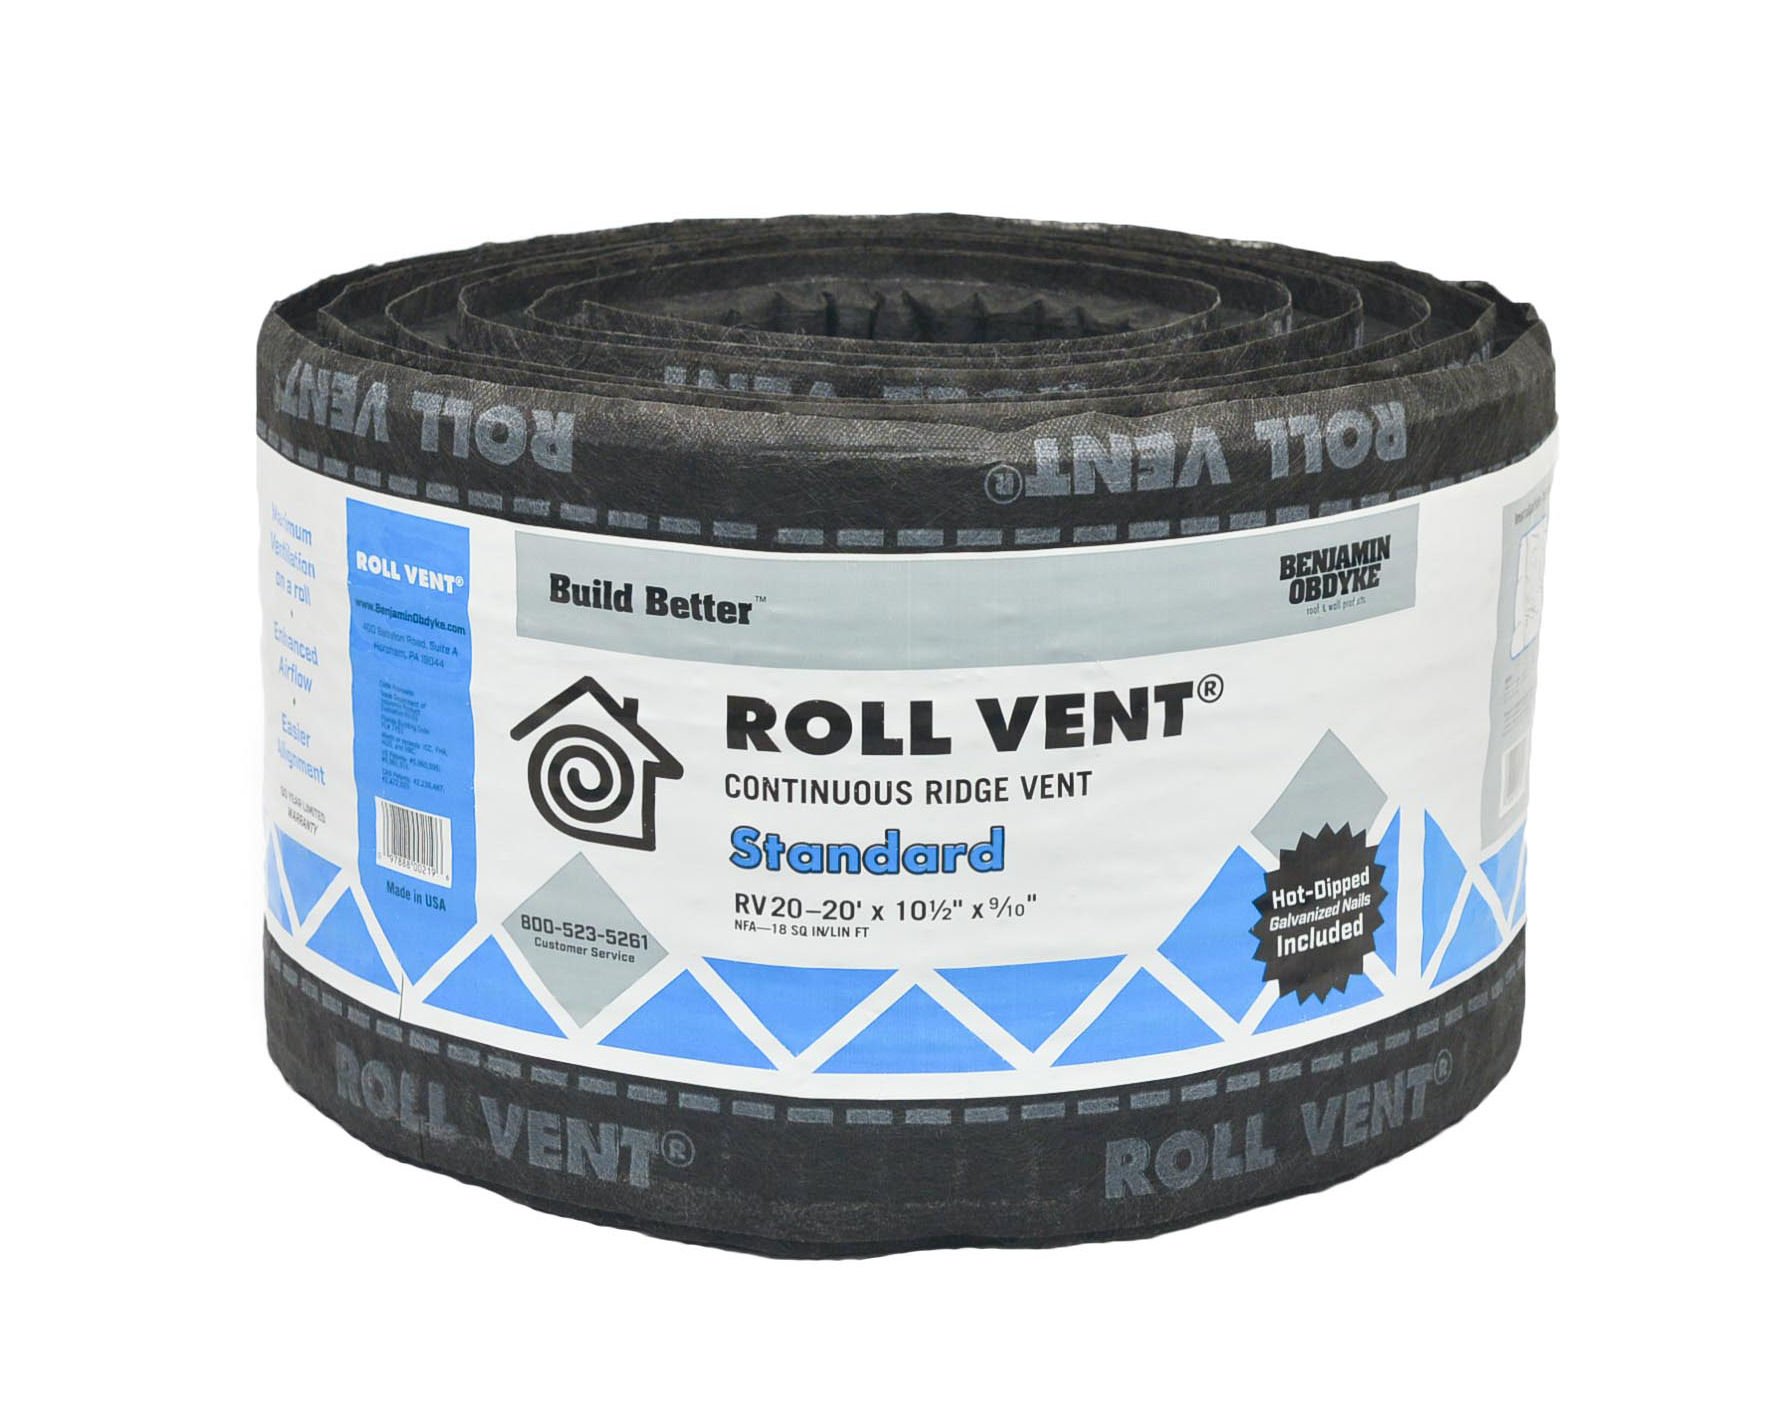 roll vent 20 new packaging cropped